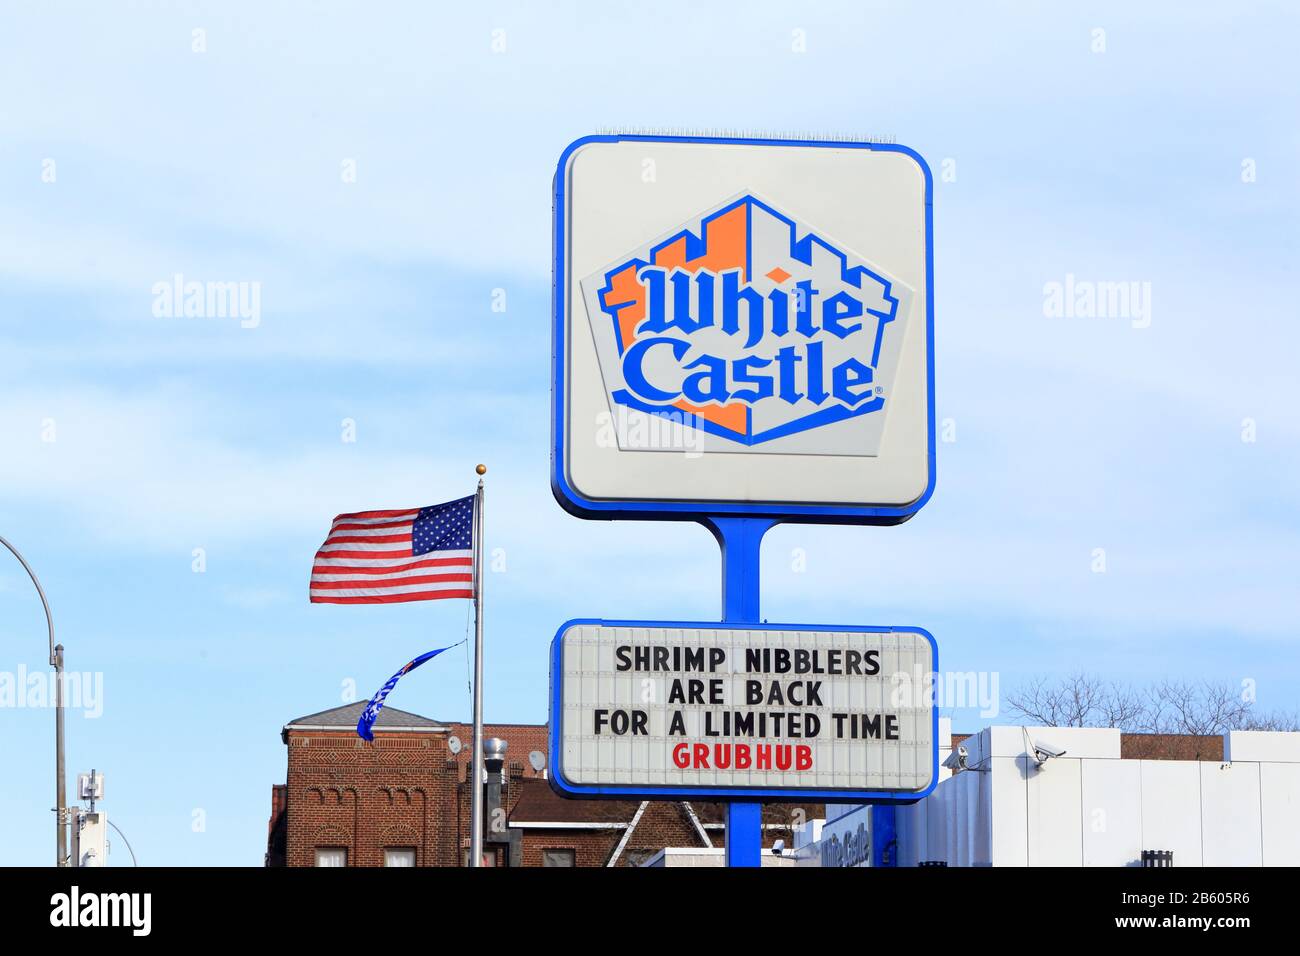 A White Castle sign on a pole against a blue sky and American flag. Stock Photo